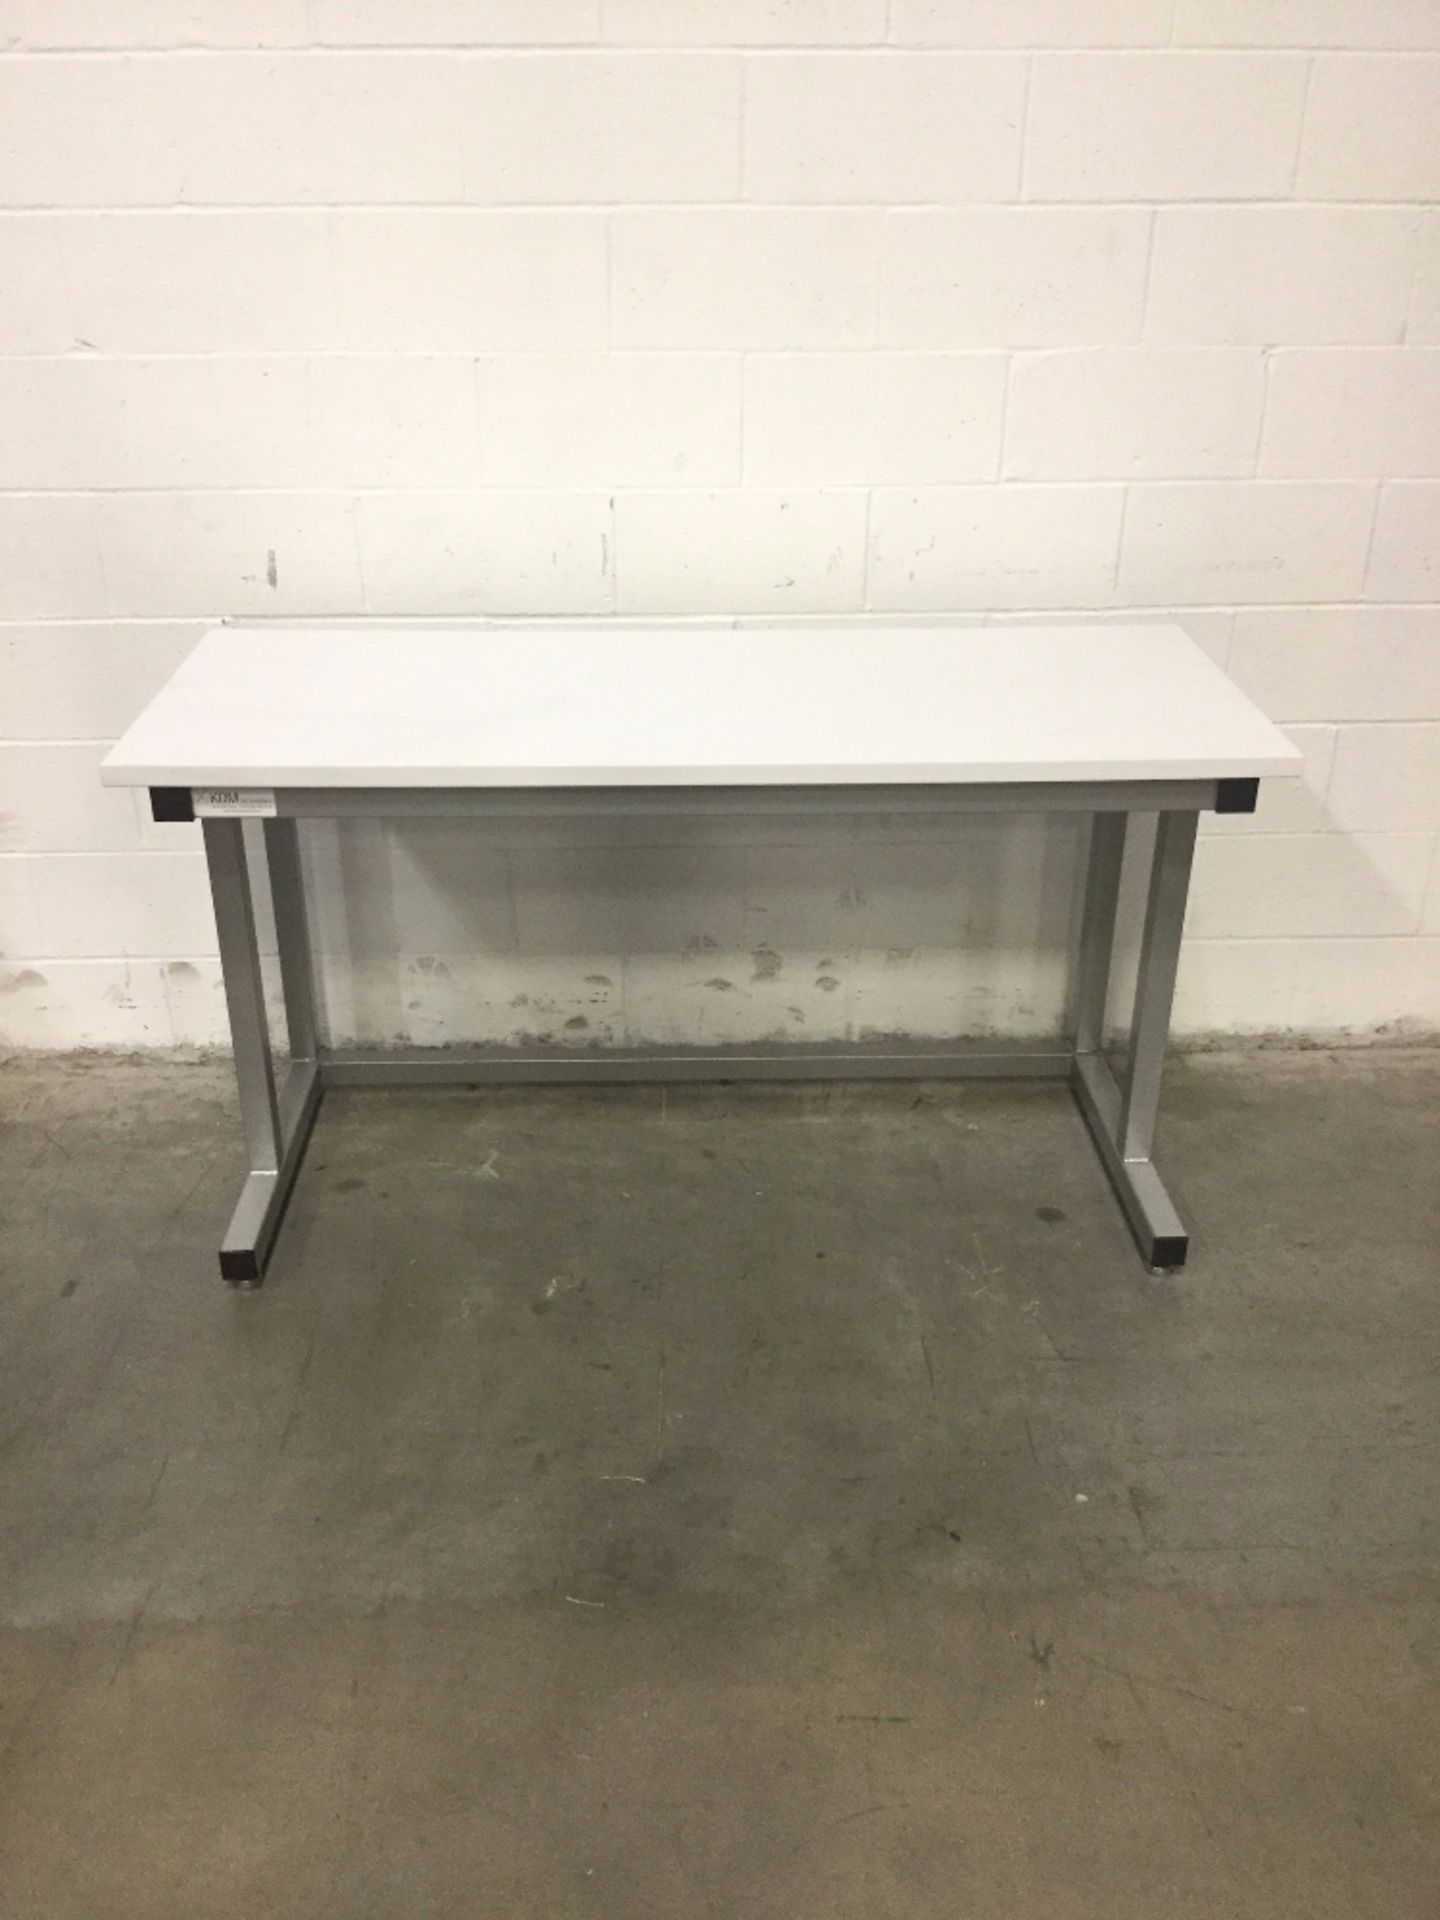 KDM Labs 5' Stationary Lab Table